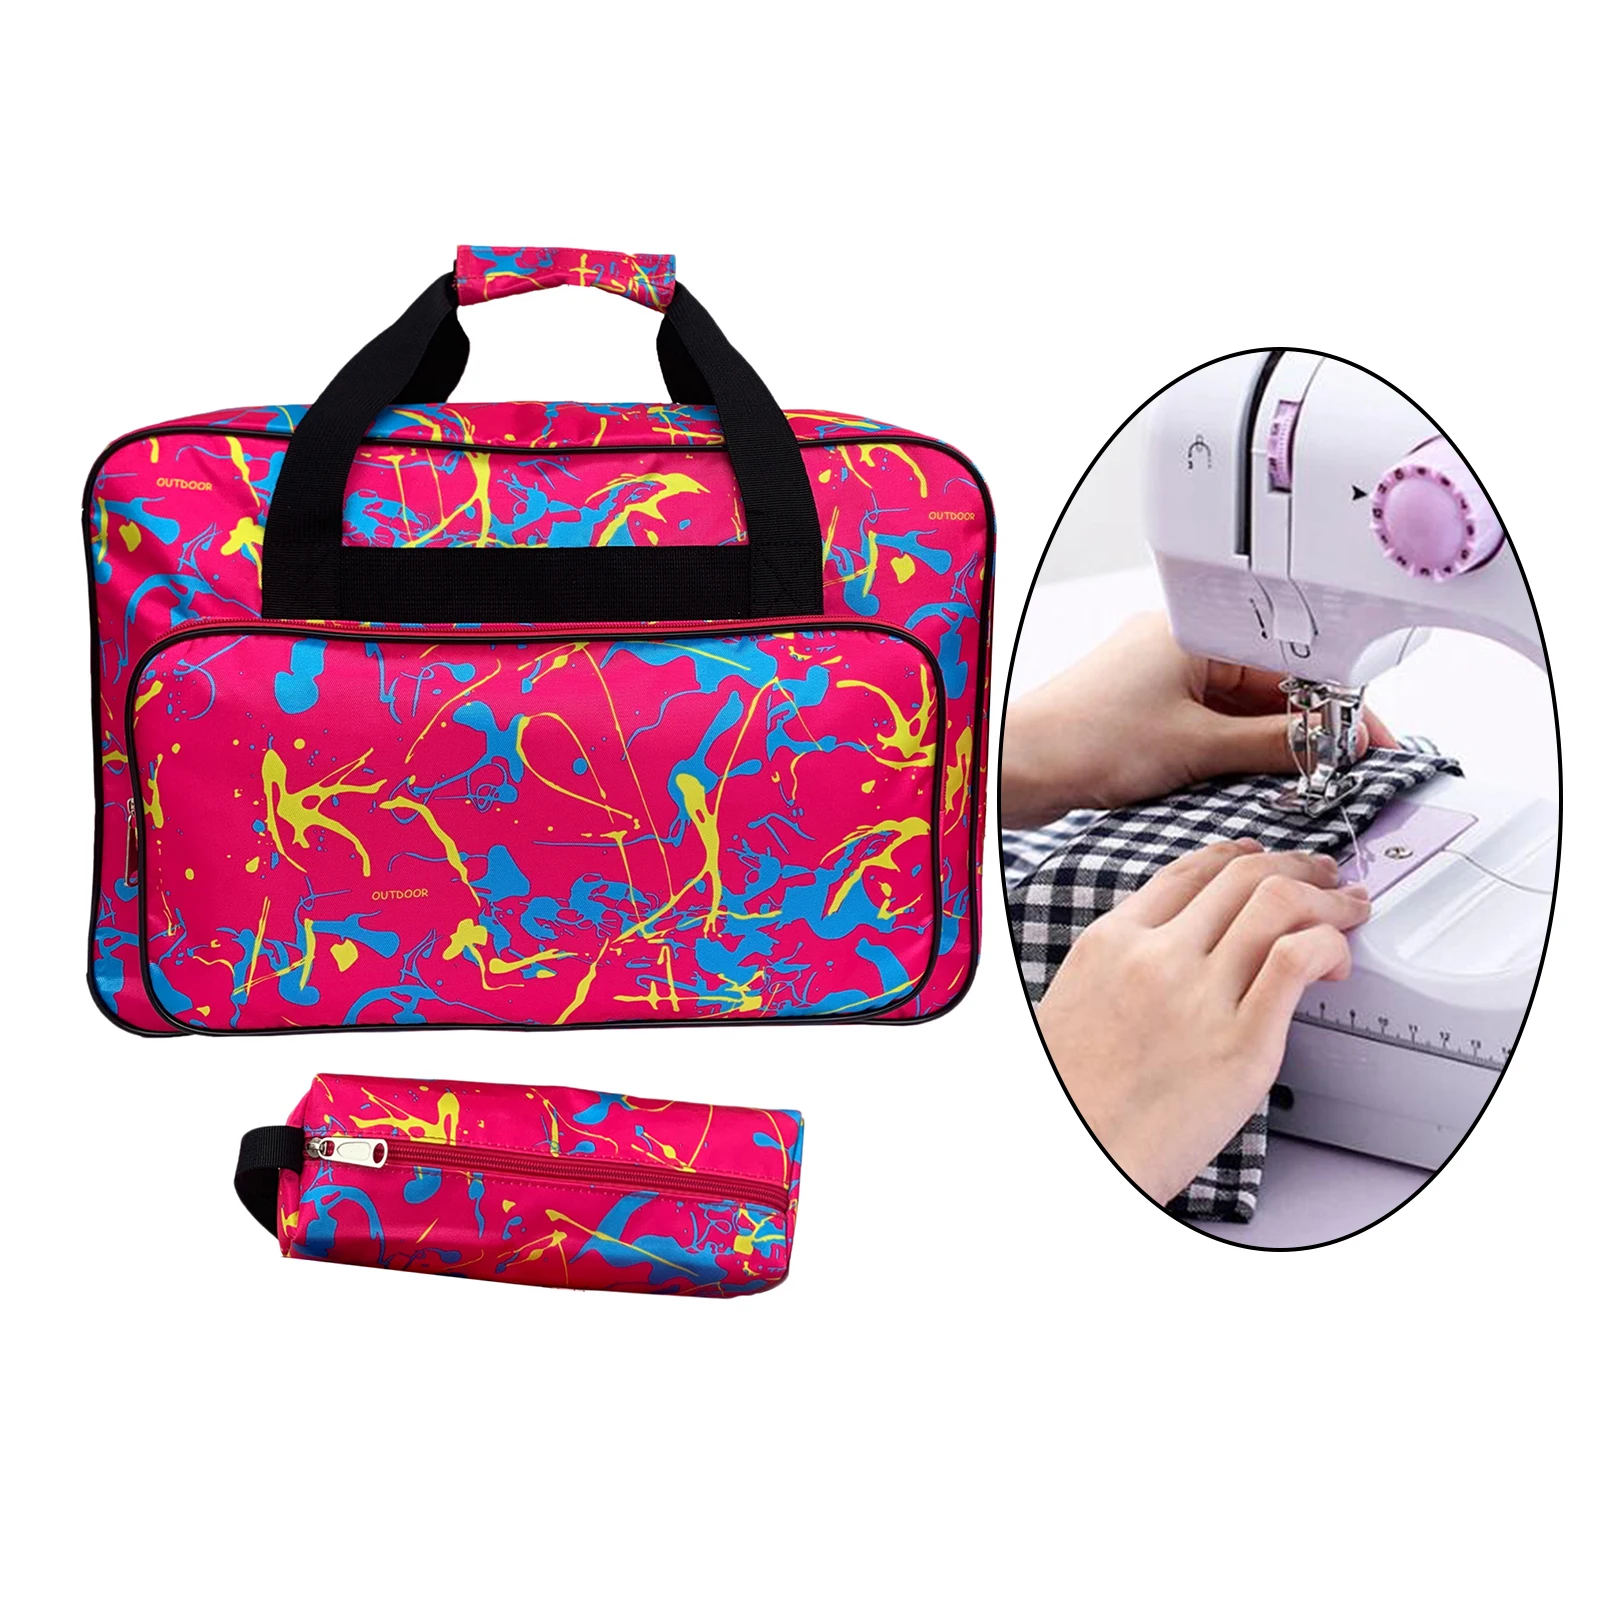 Sewing Machine Carry Bag Sewer Sew Machine Tote Universal Pockets Carrier